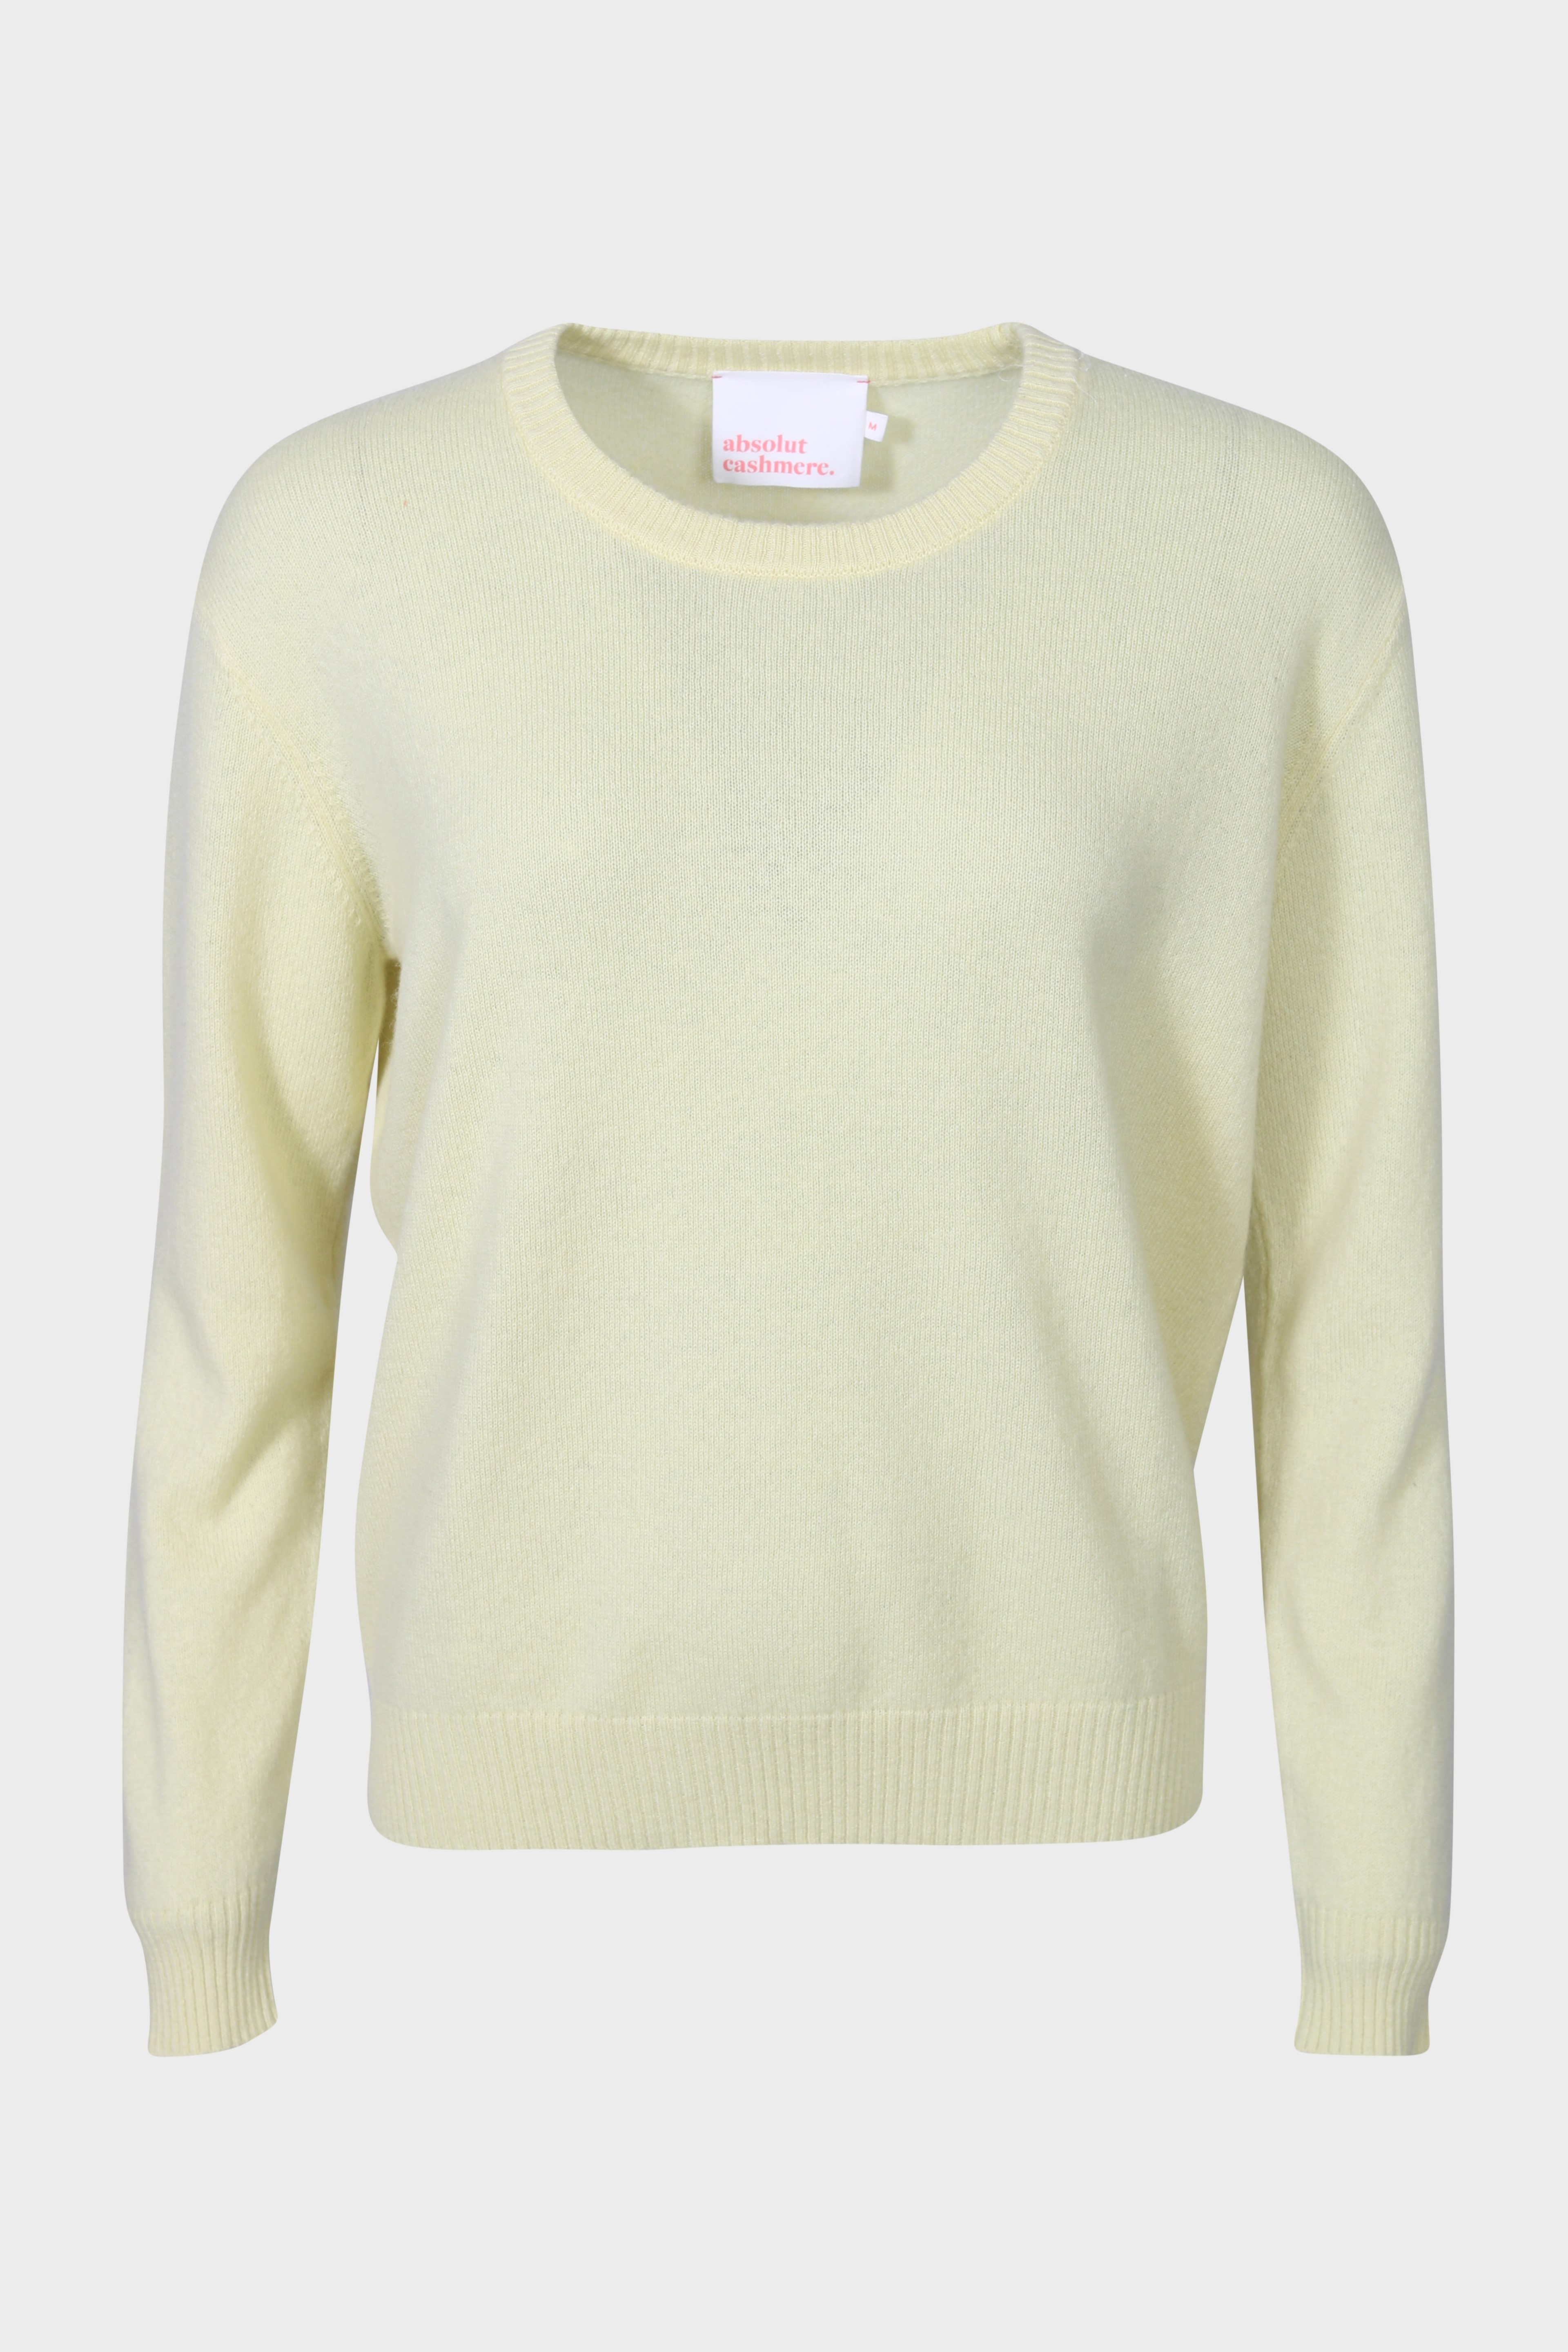 ABSOLUT CASHMERE Sweater Ysee Banana